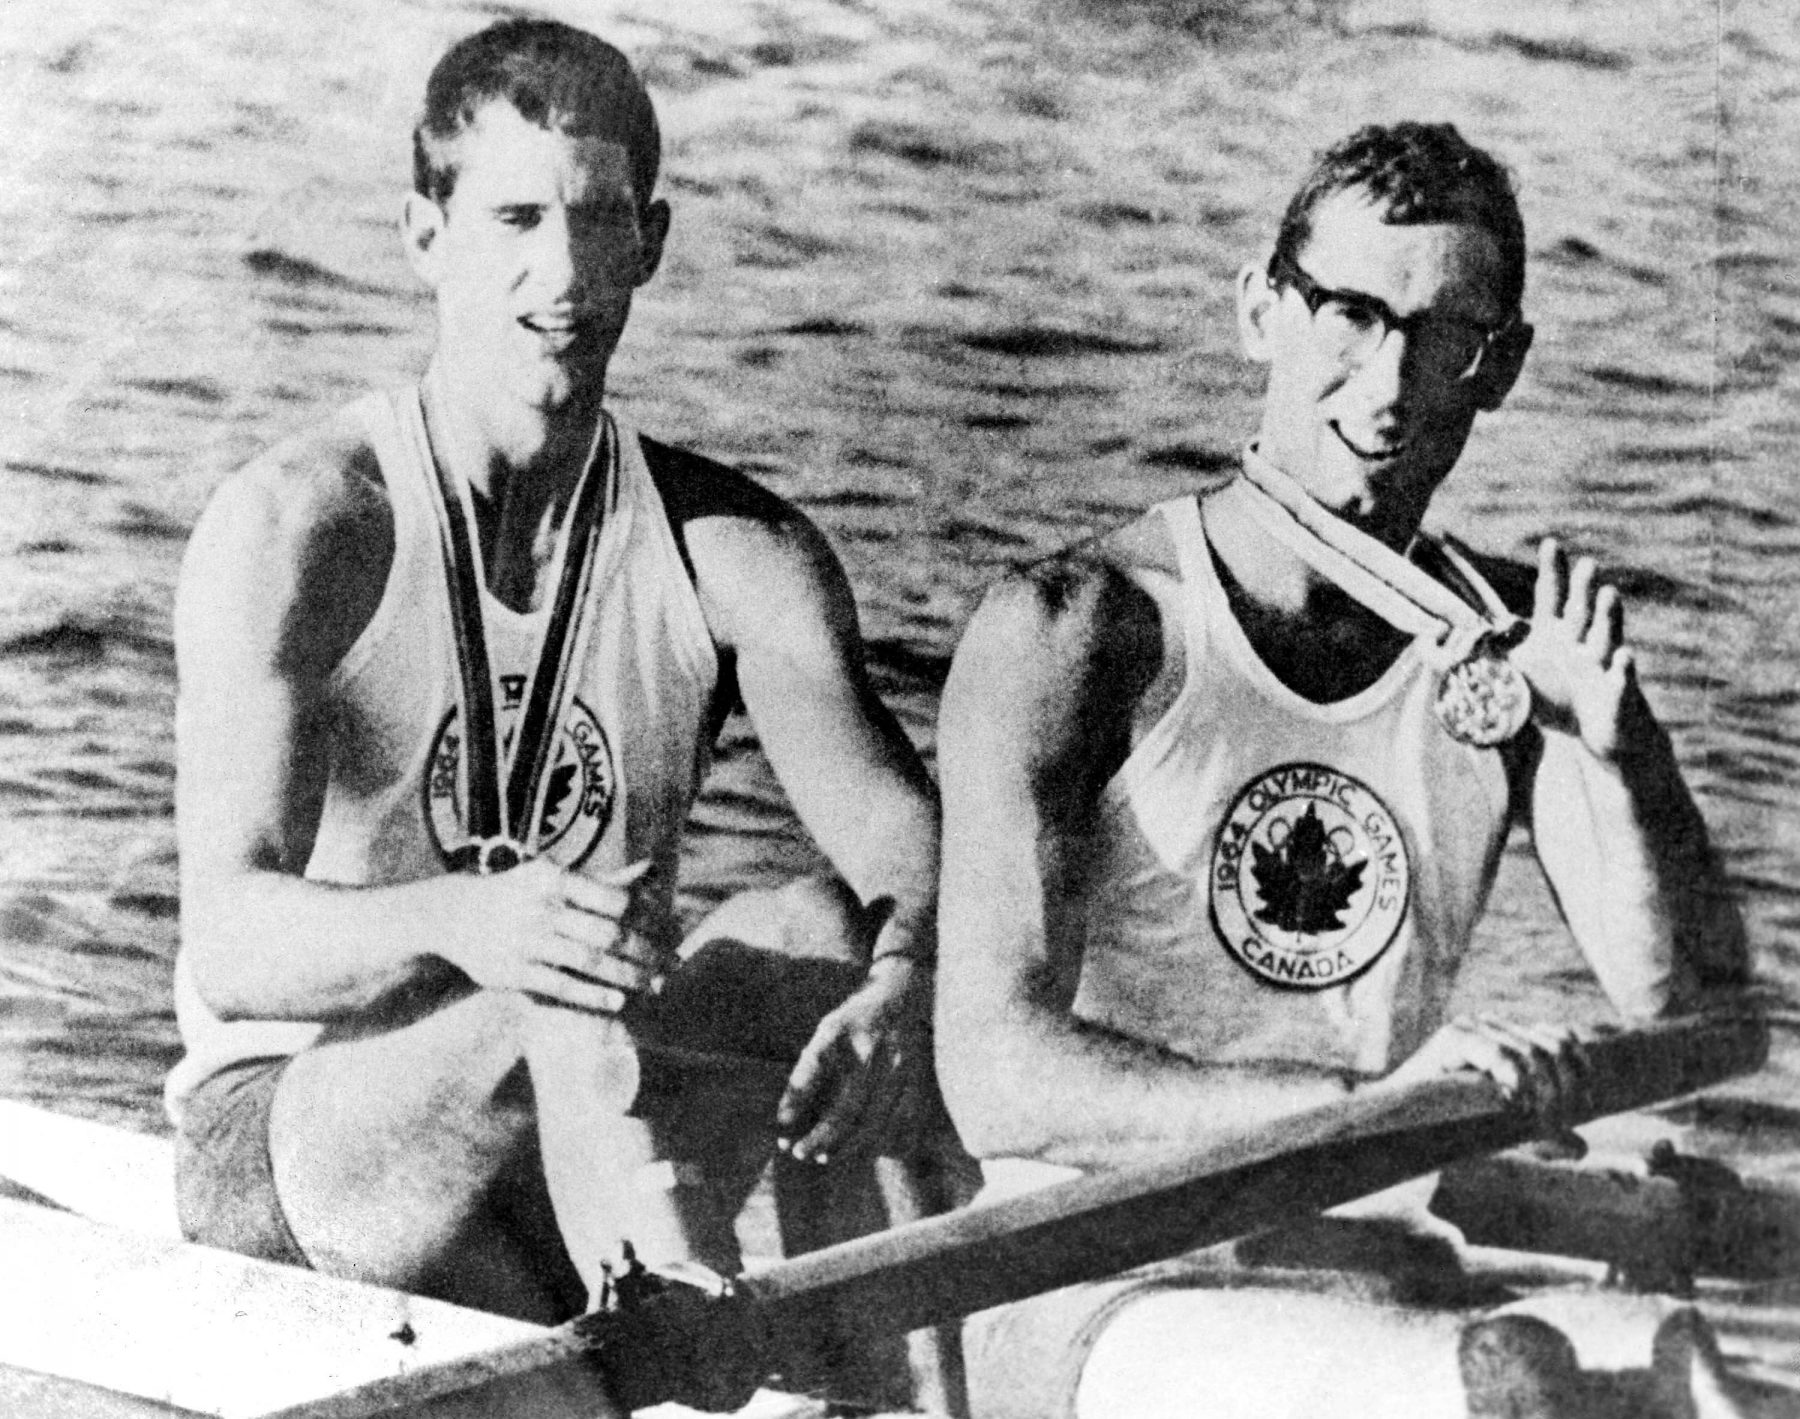 Canada's Roger Jackson and George Hungerford celebrate their gold medal win in the pairs rowing event at the Tokyo 1964 Olympic Games.